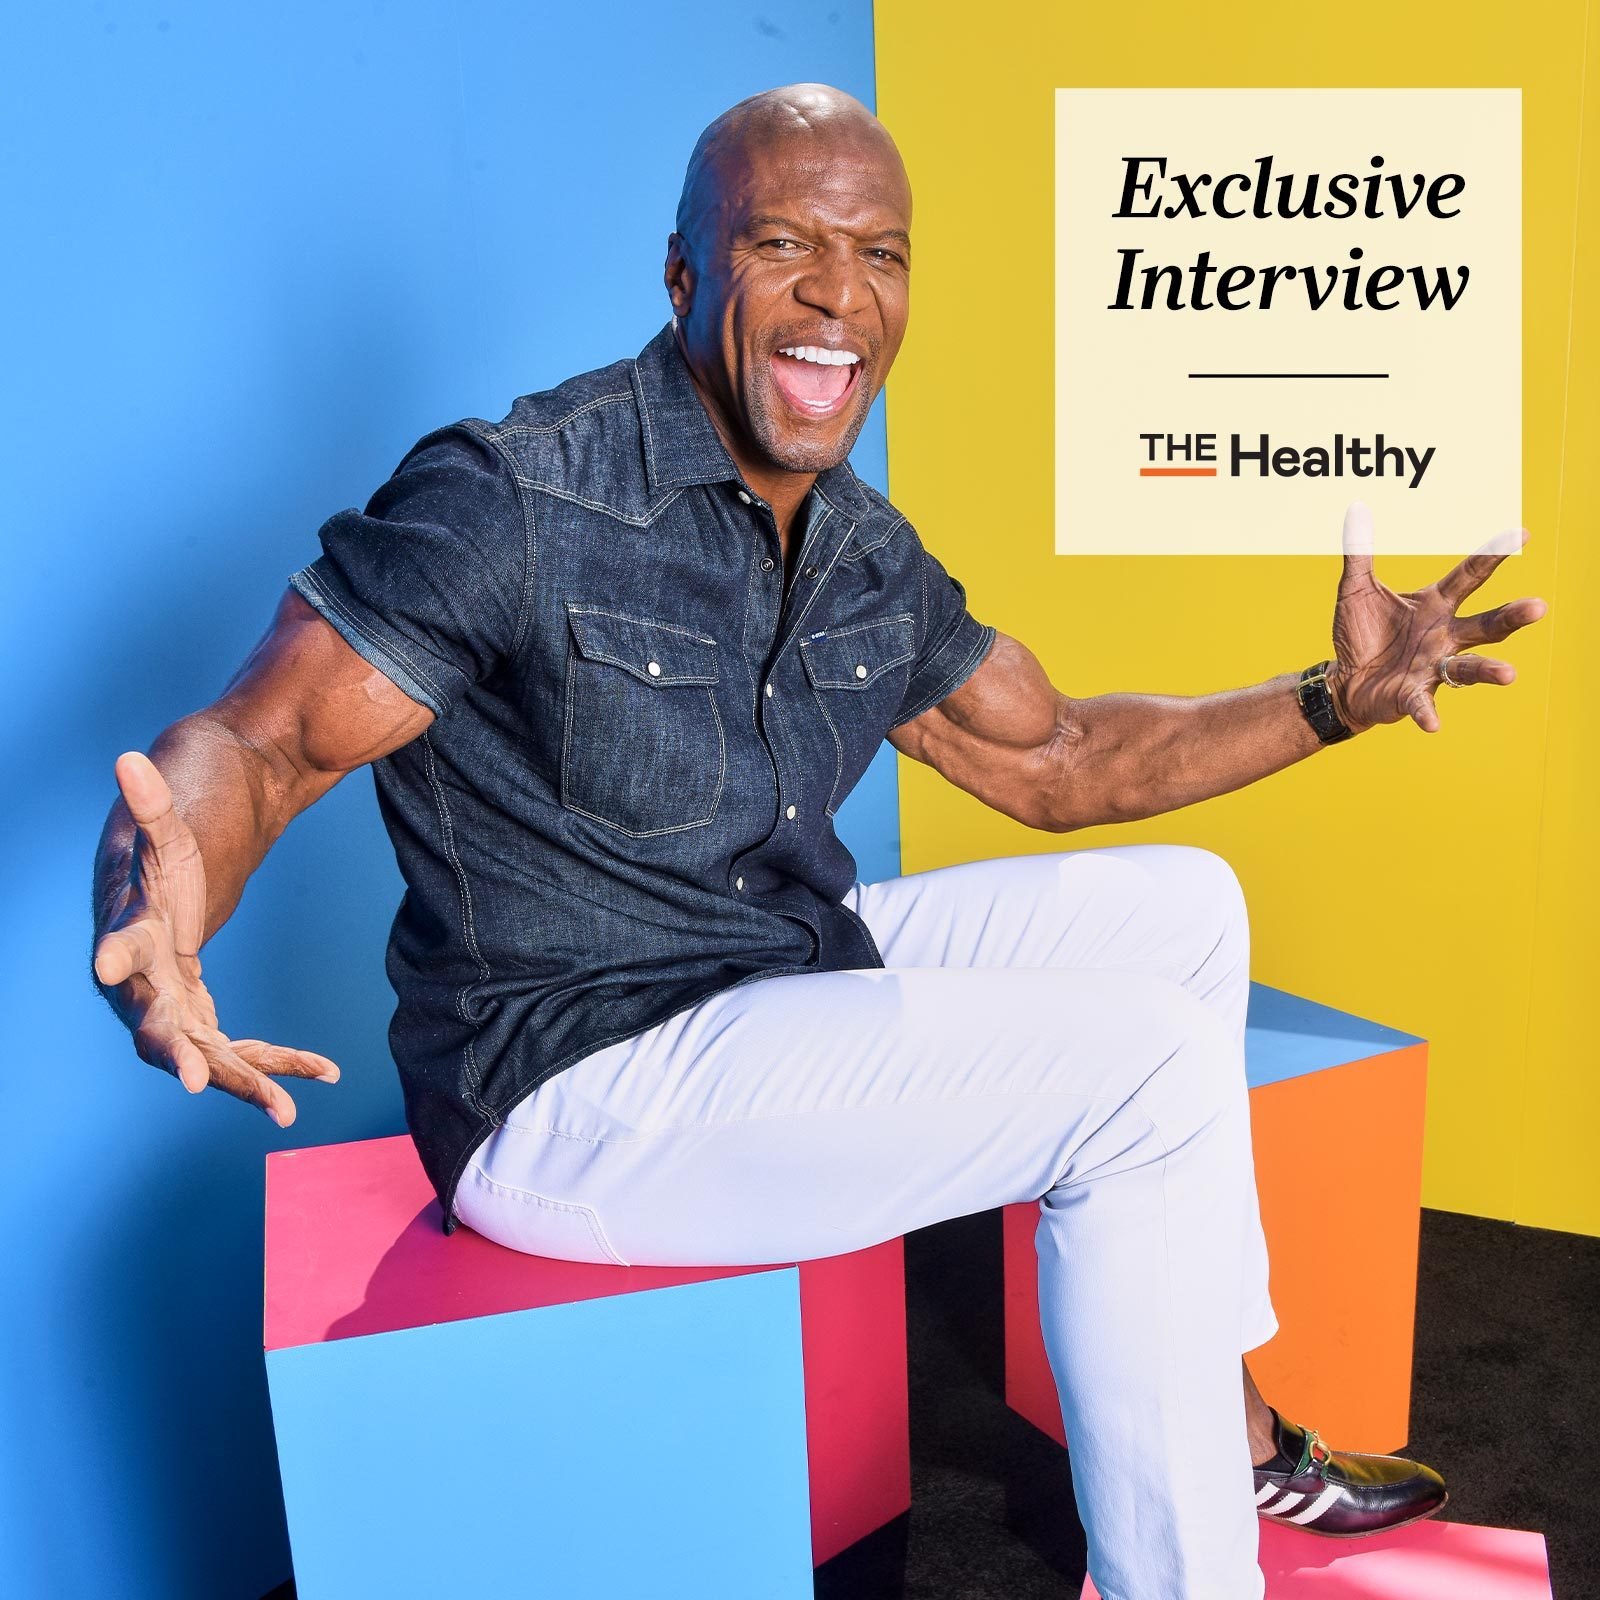 'America's Got Talent' Host Terry Crews Opens Up About the Health Issue That Forced a Life Shift